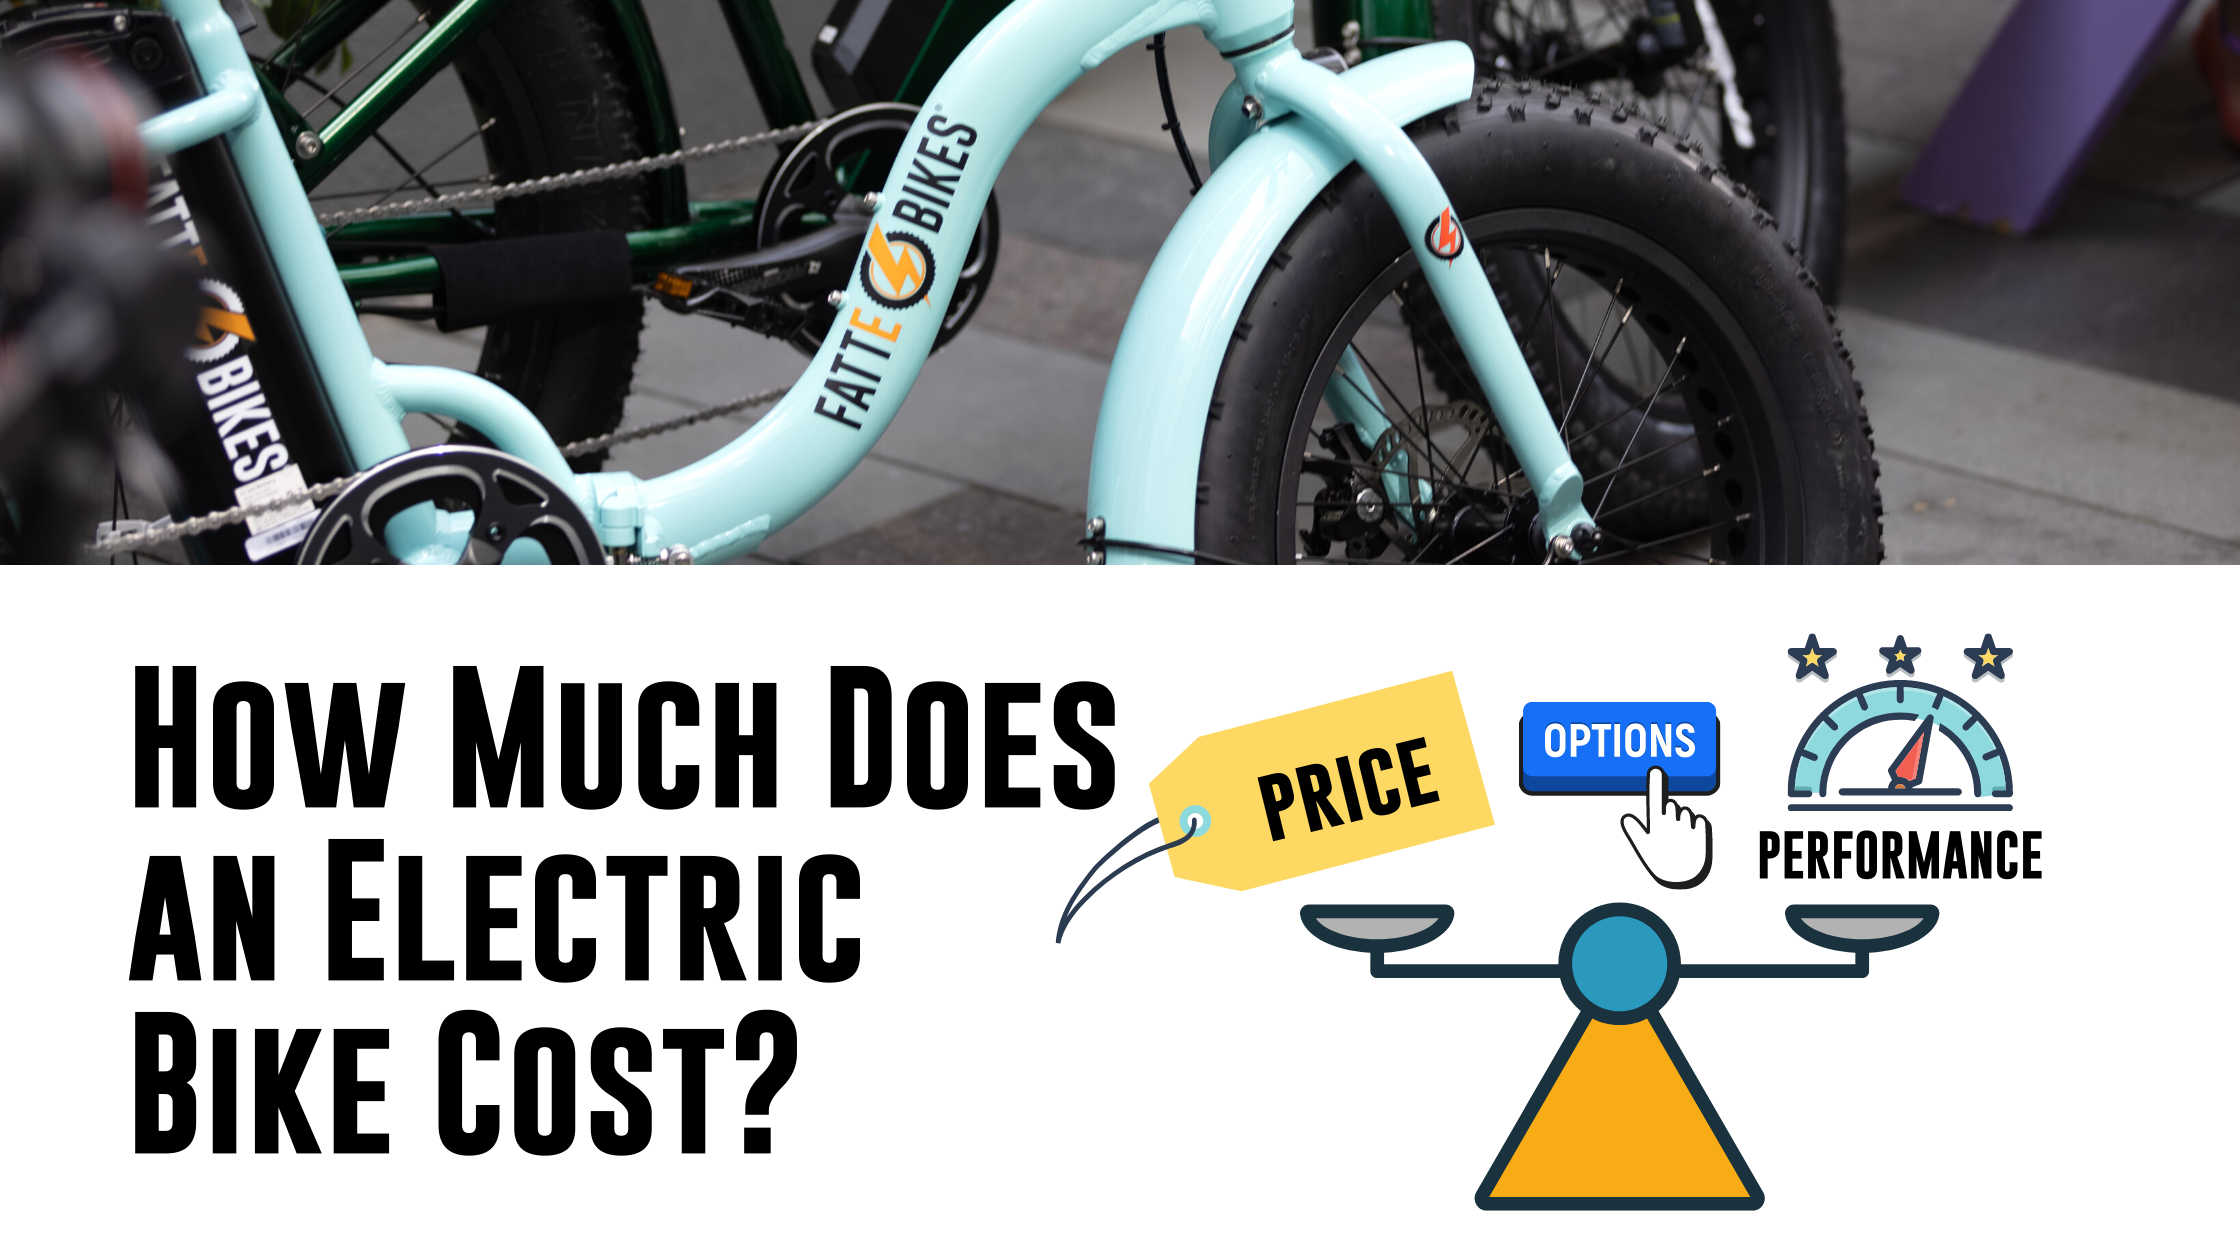 How Much Does It Cost to Buy, Repair, and Use an Electric Motorcycle?